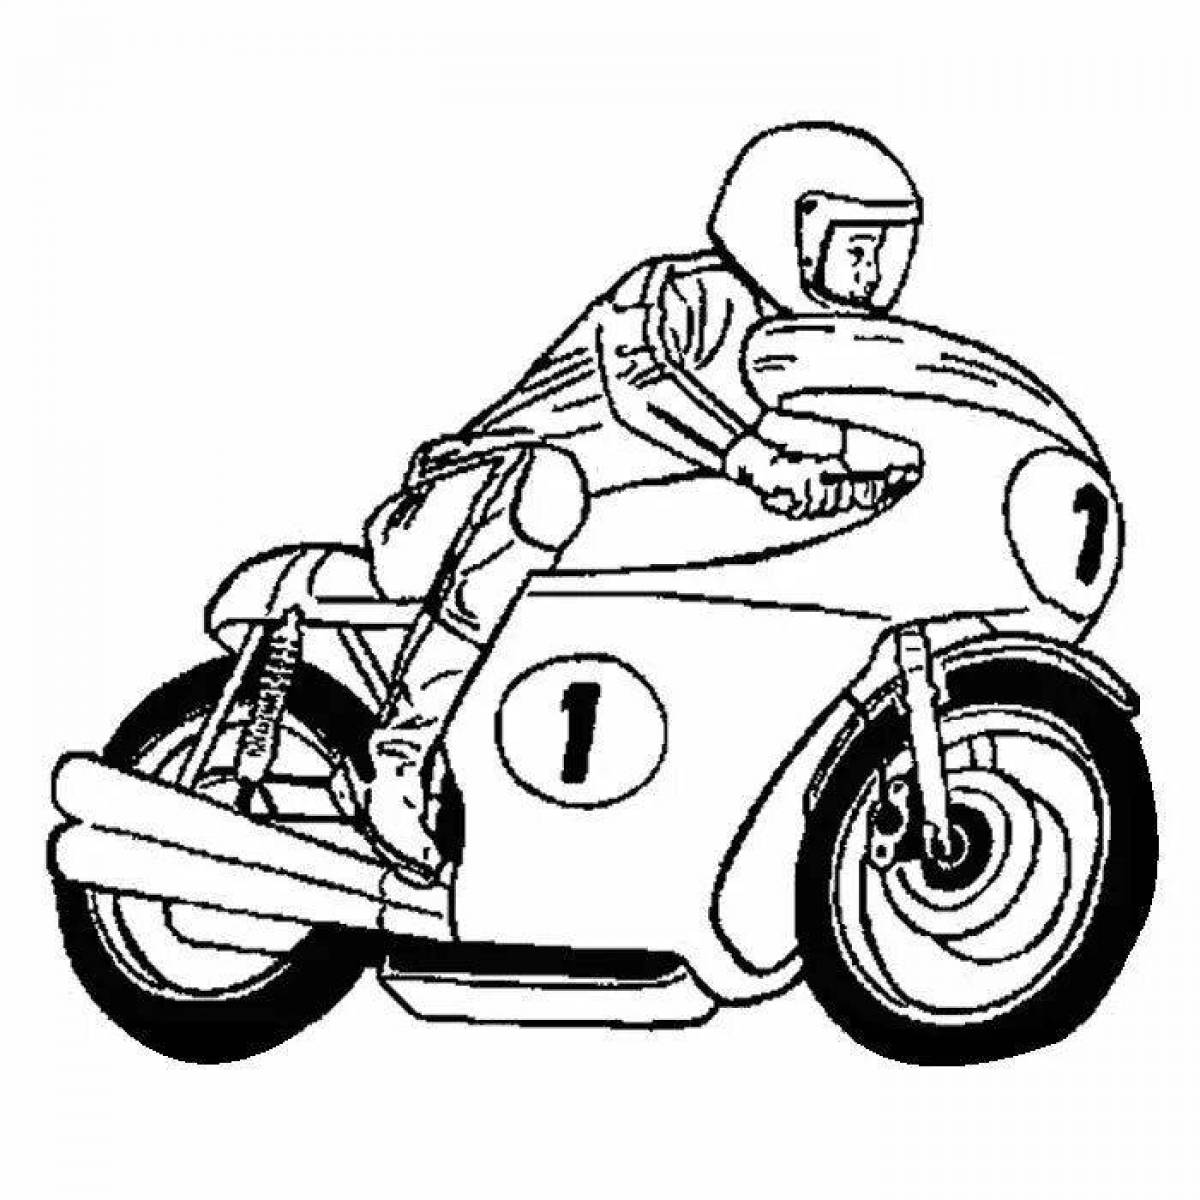 Coloring page glamorous motorcyclist